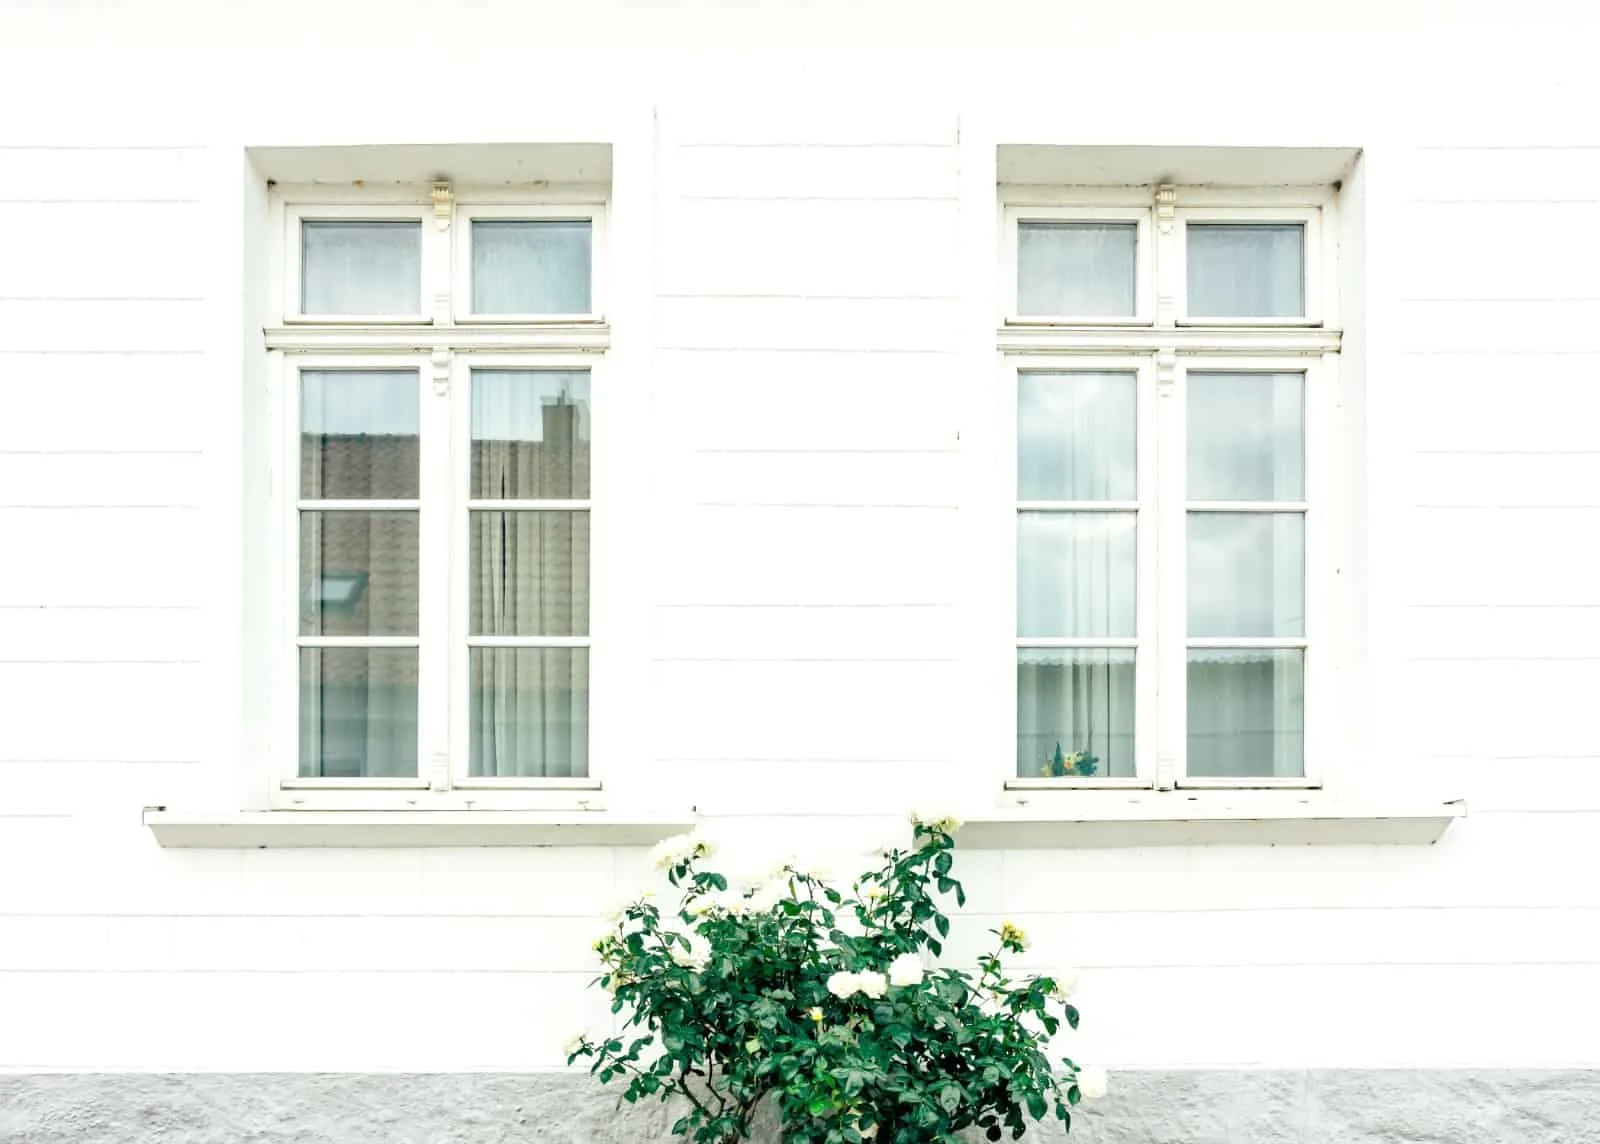 A house with bushes in front of a window.